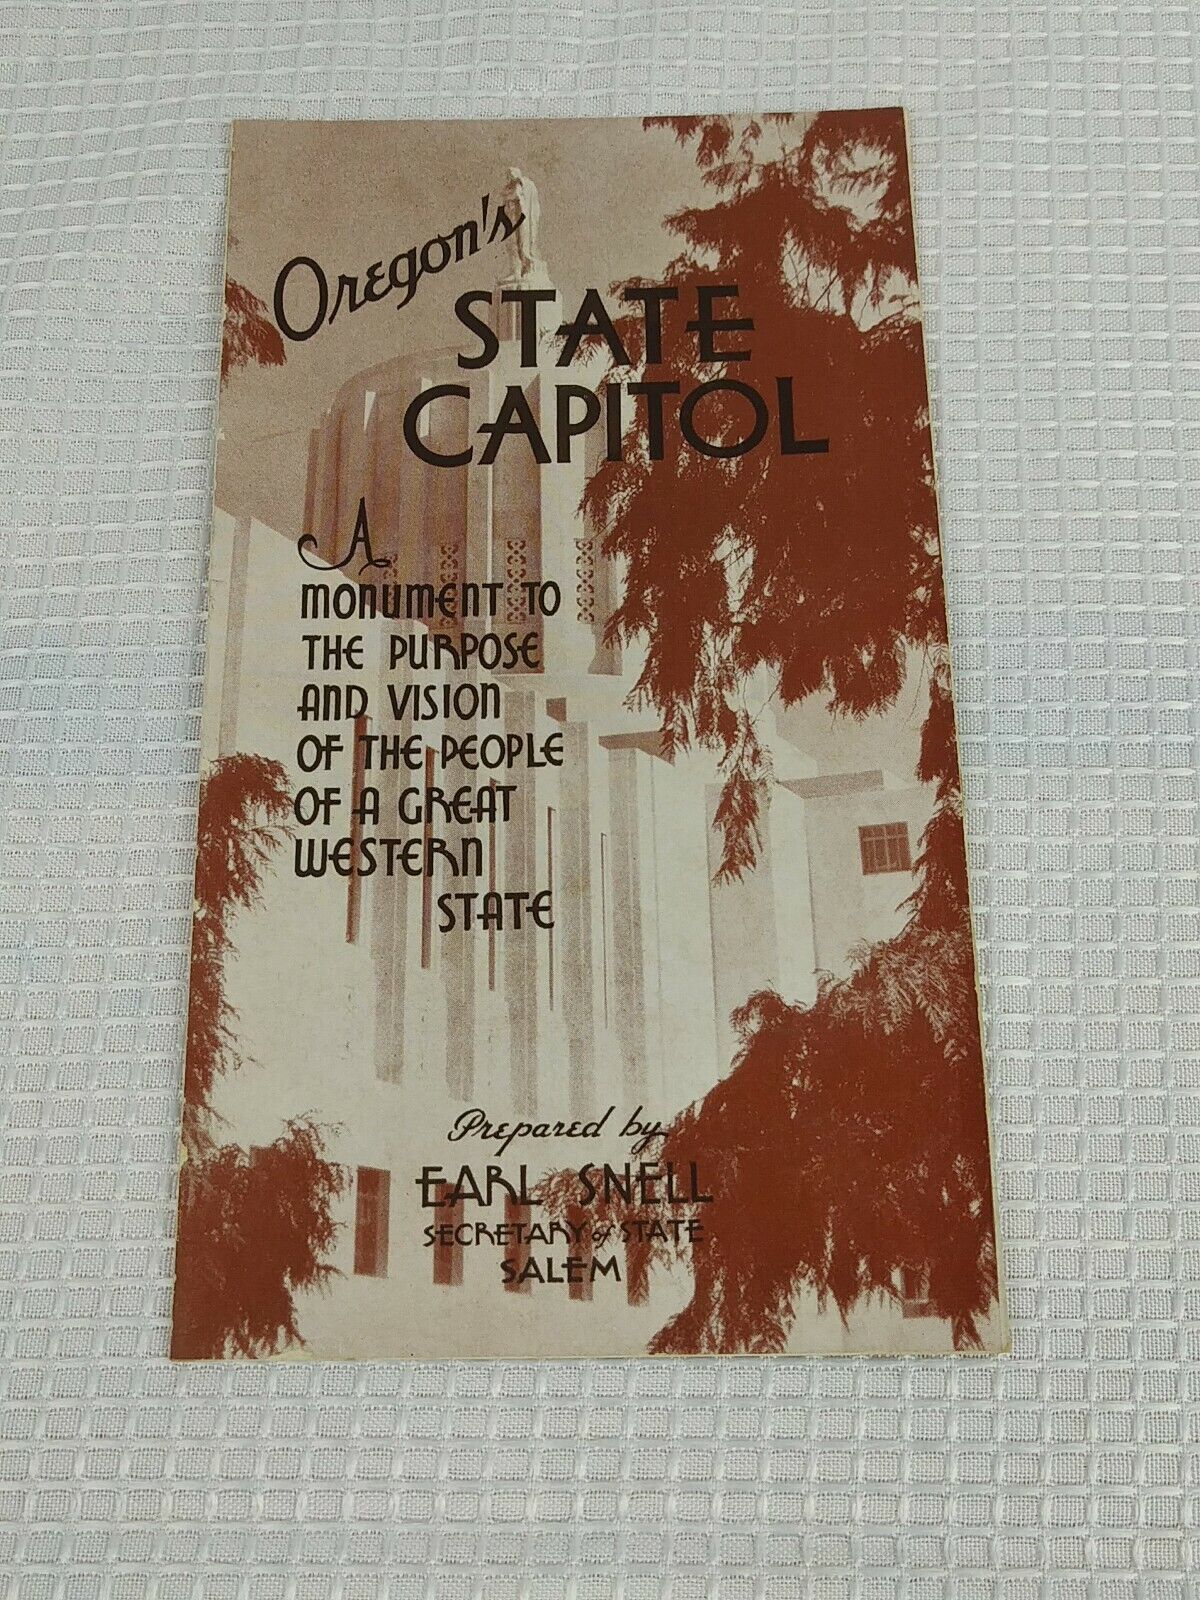 Oregon's State Capitol 1930's Info Guide Earl Snell Secretary of State Salem WOW